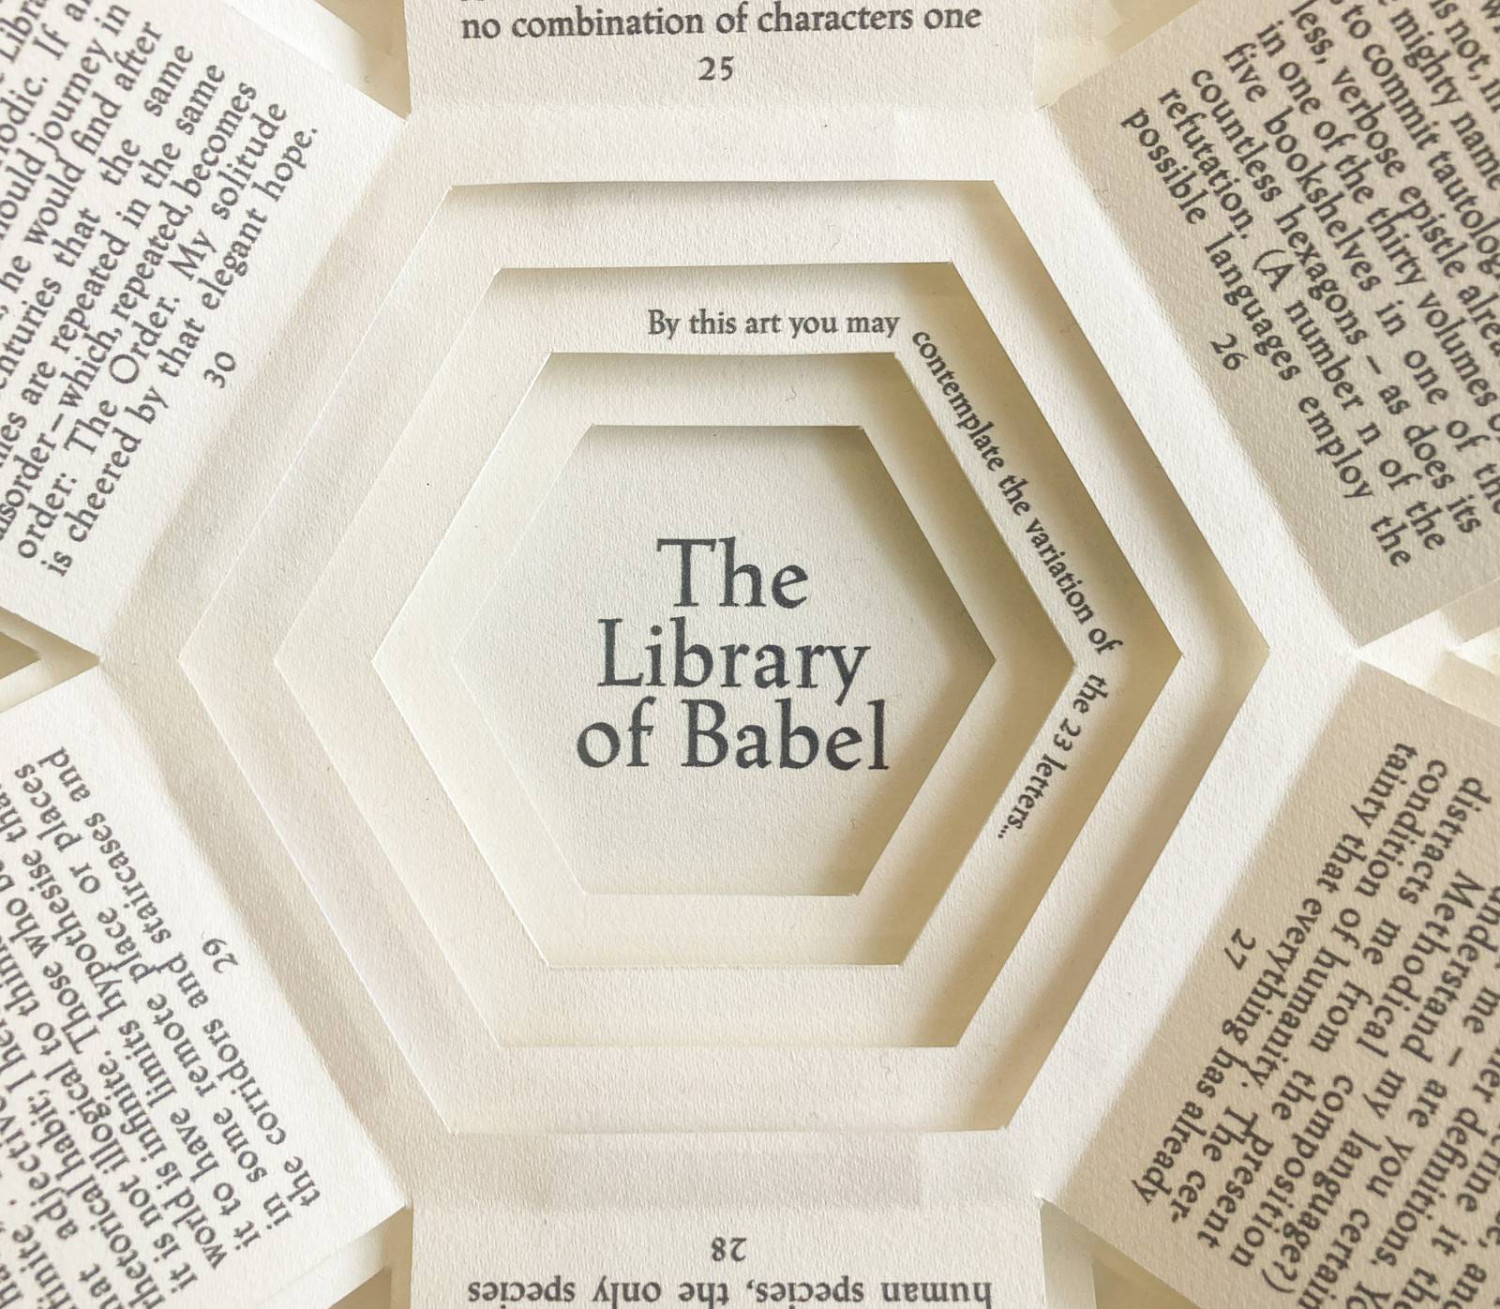 The Library As Architecture - The Library of Babel